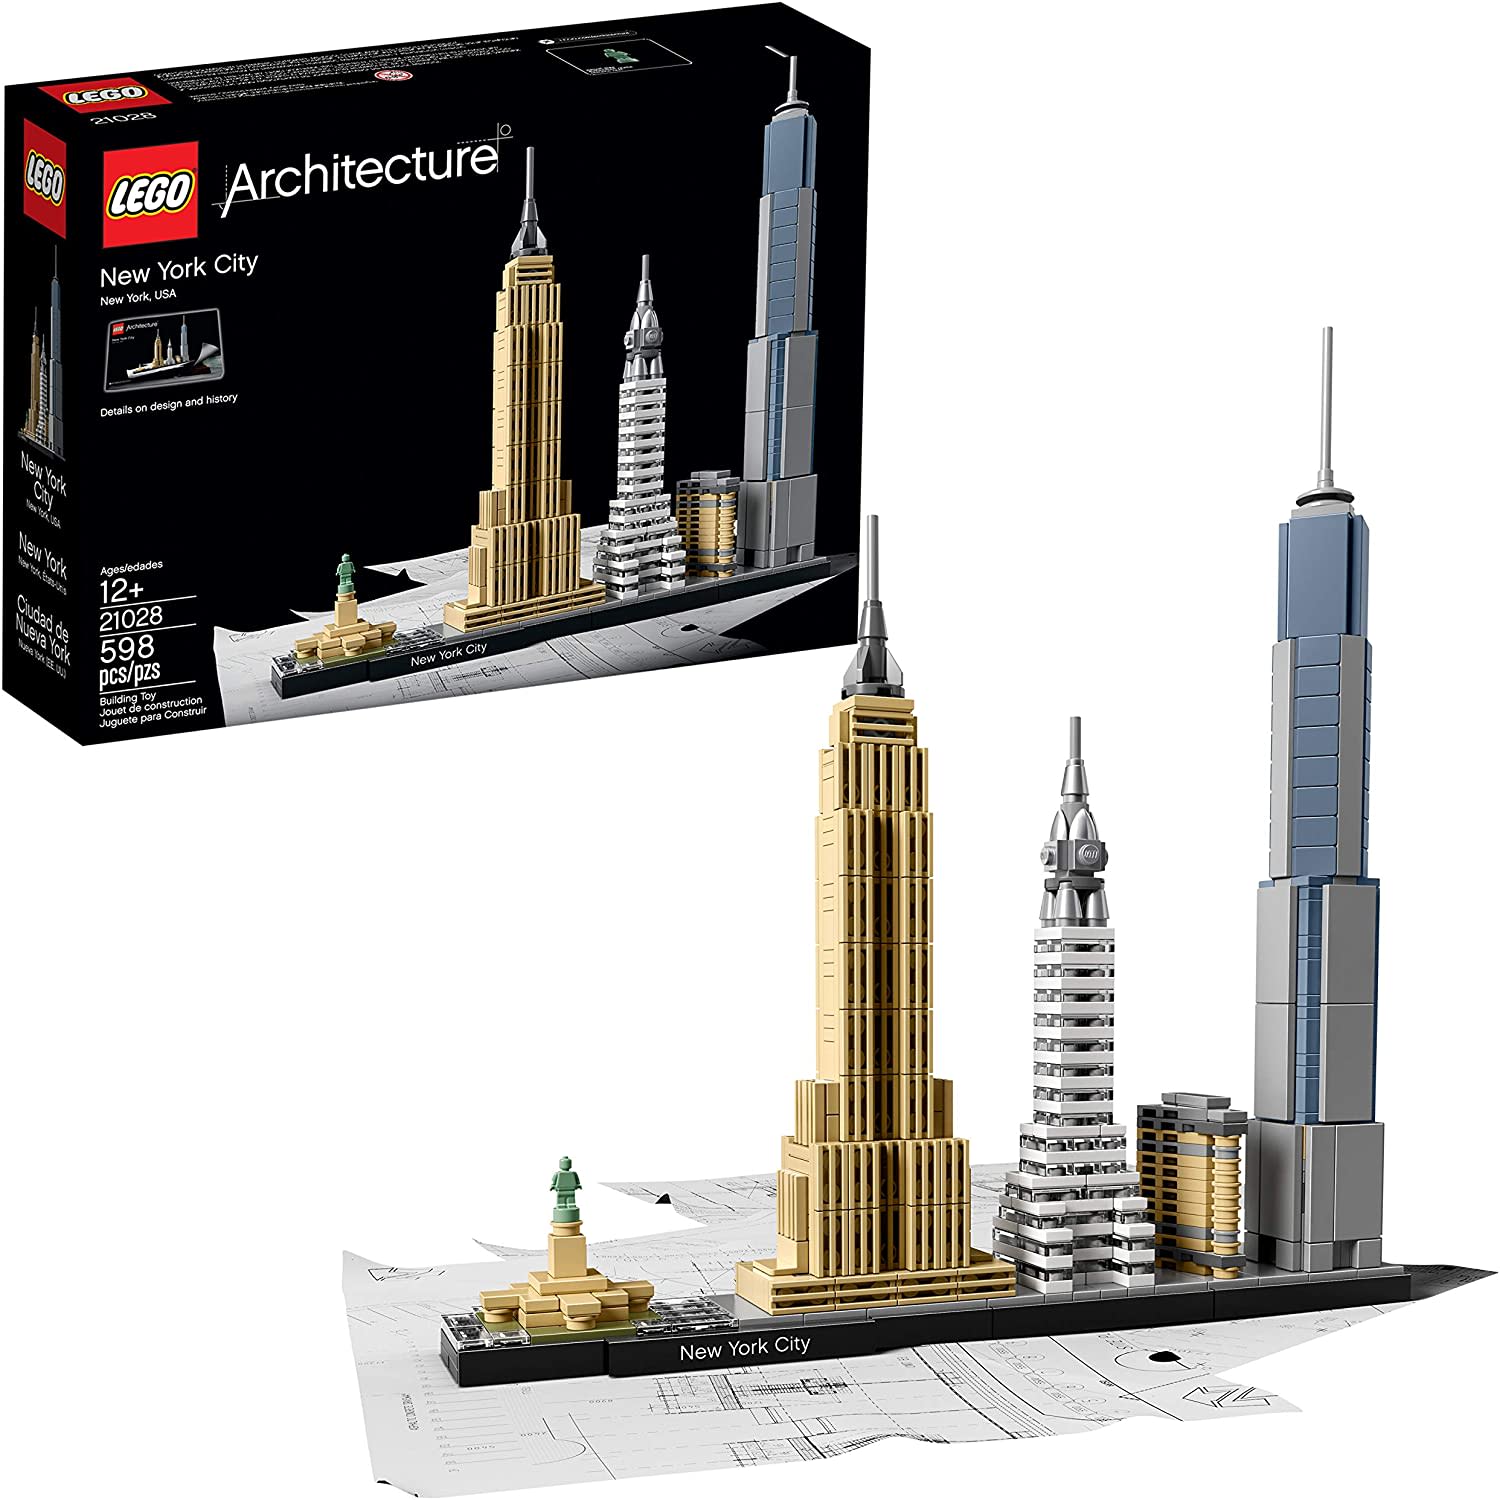 11 gifts for the architecture enthusiast